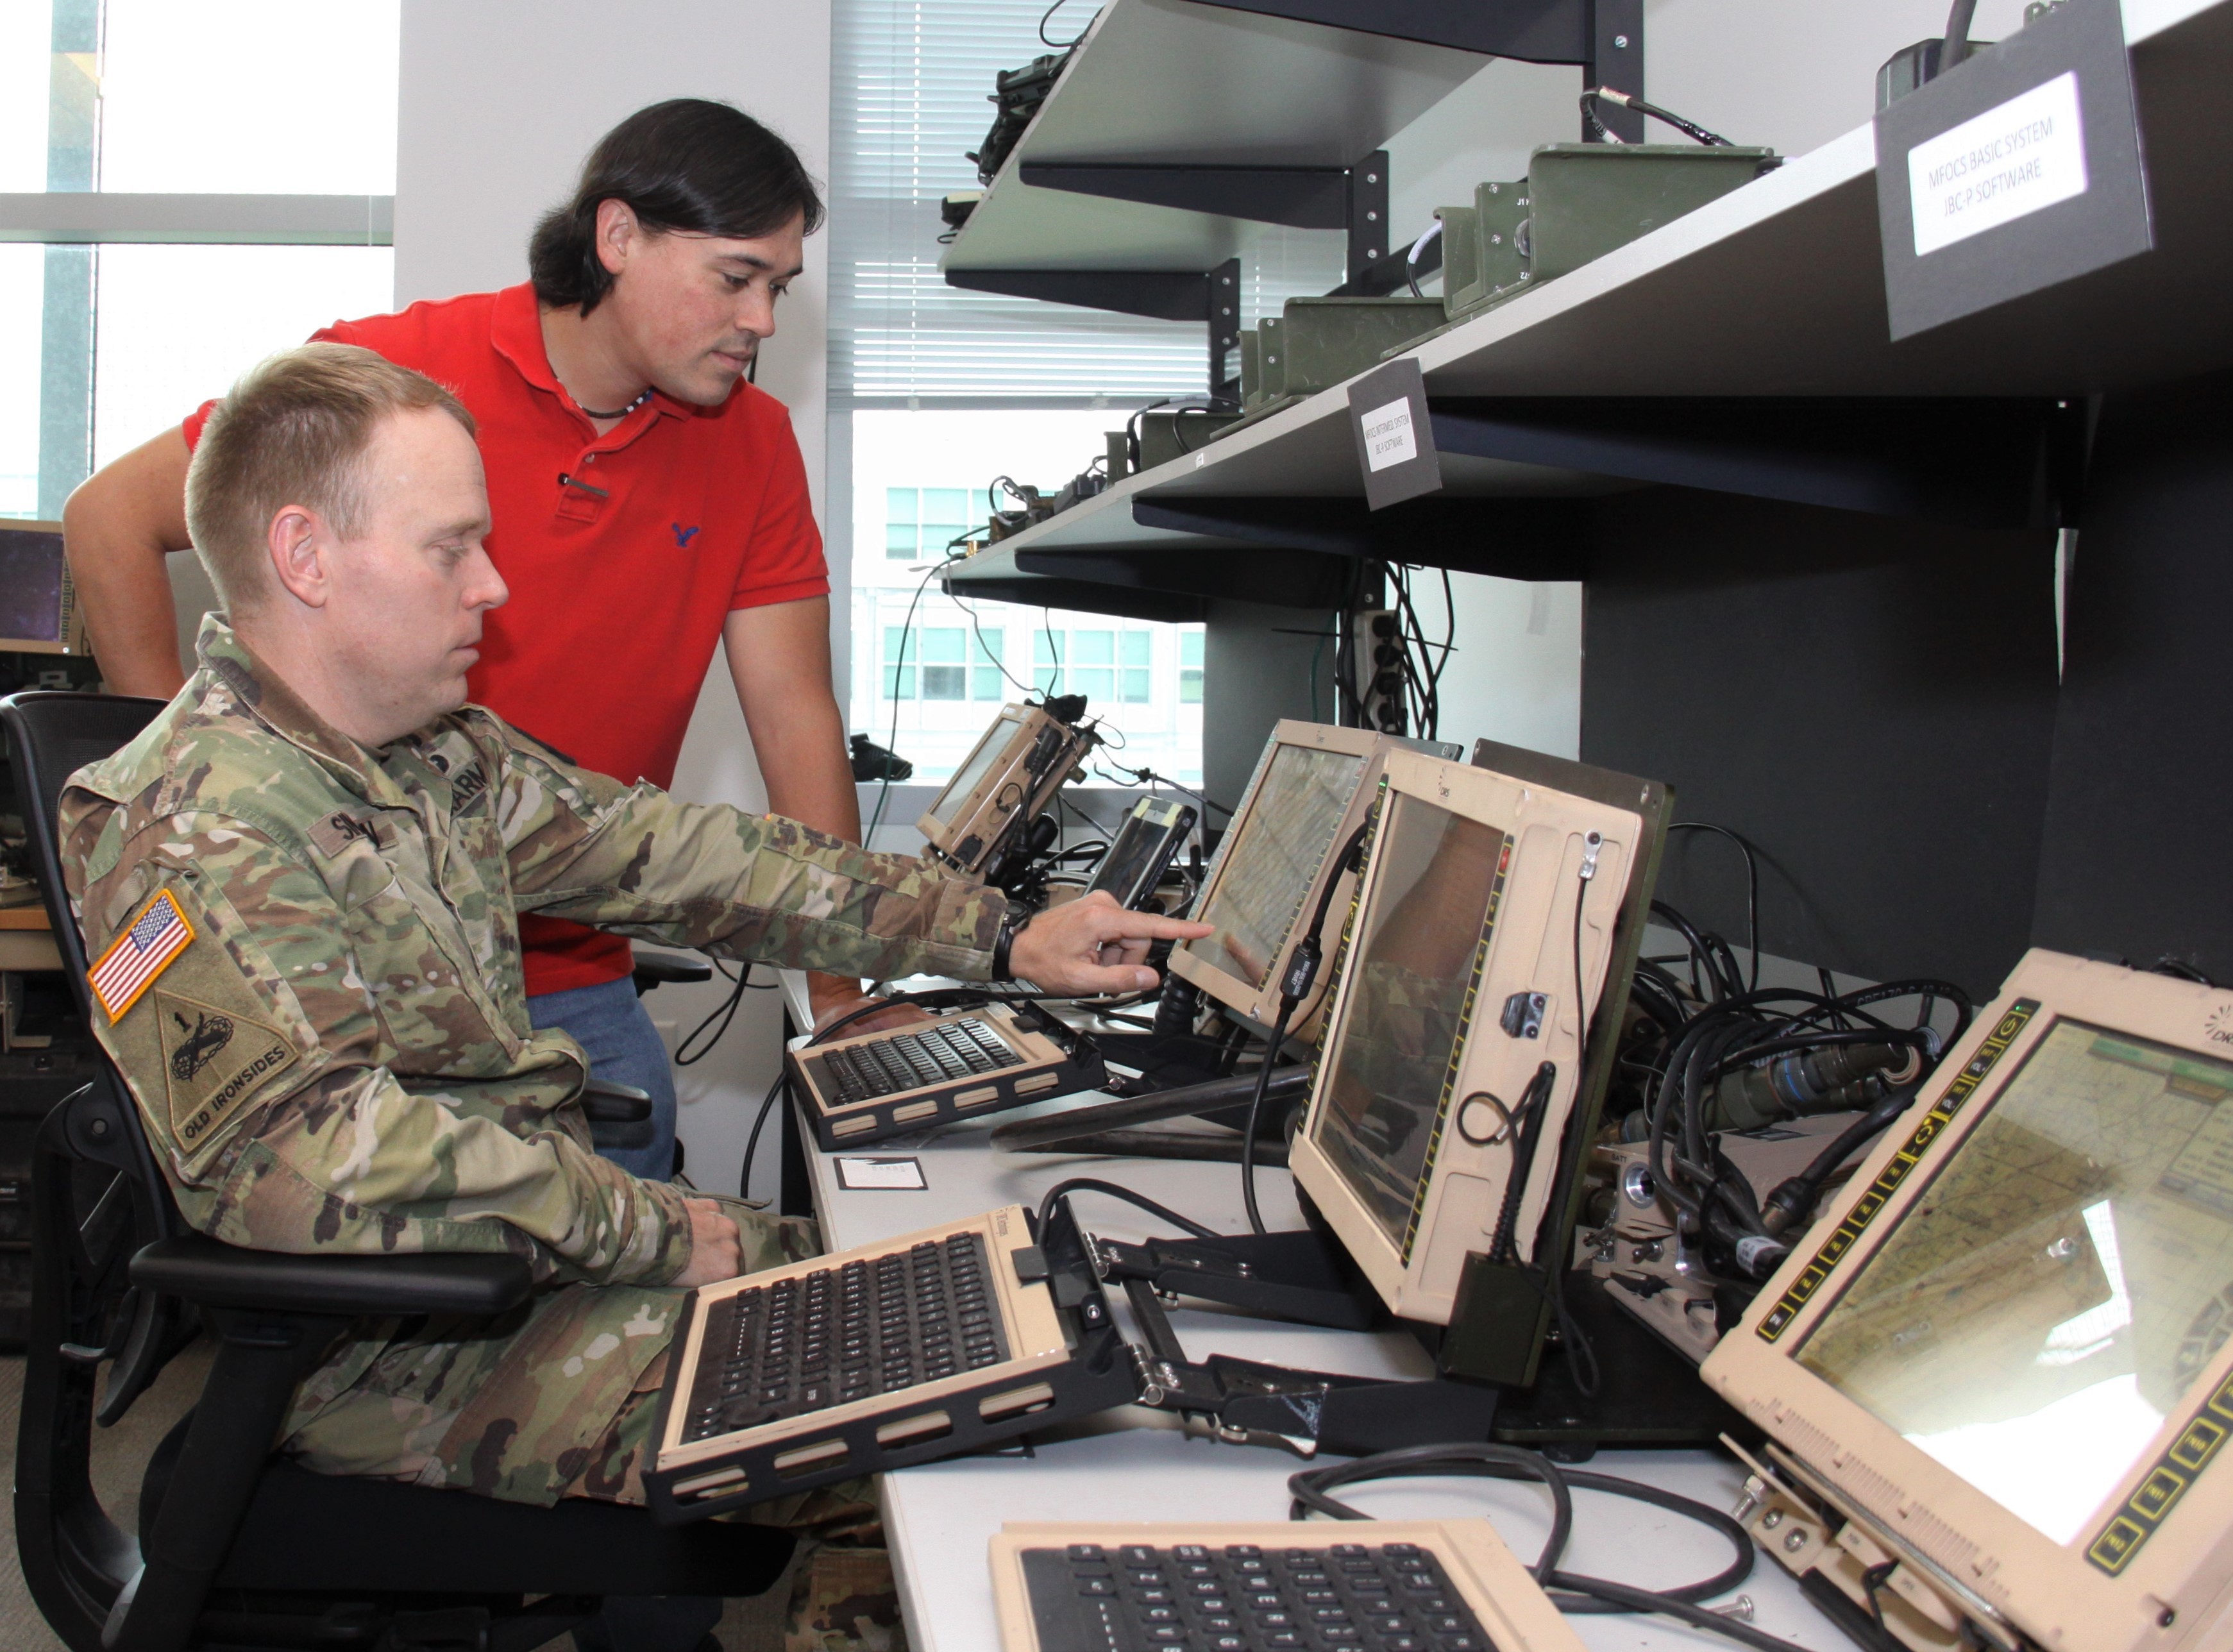 Army aims to expand vehicle computing systems for lighter, smaller options | Article | The United States Army